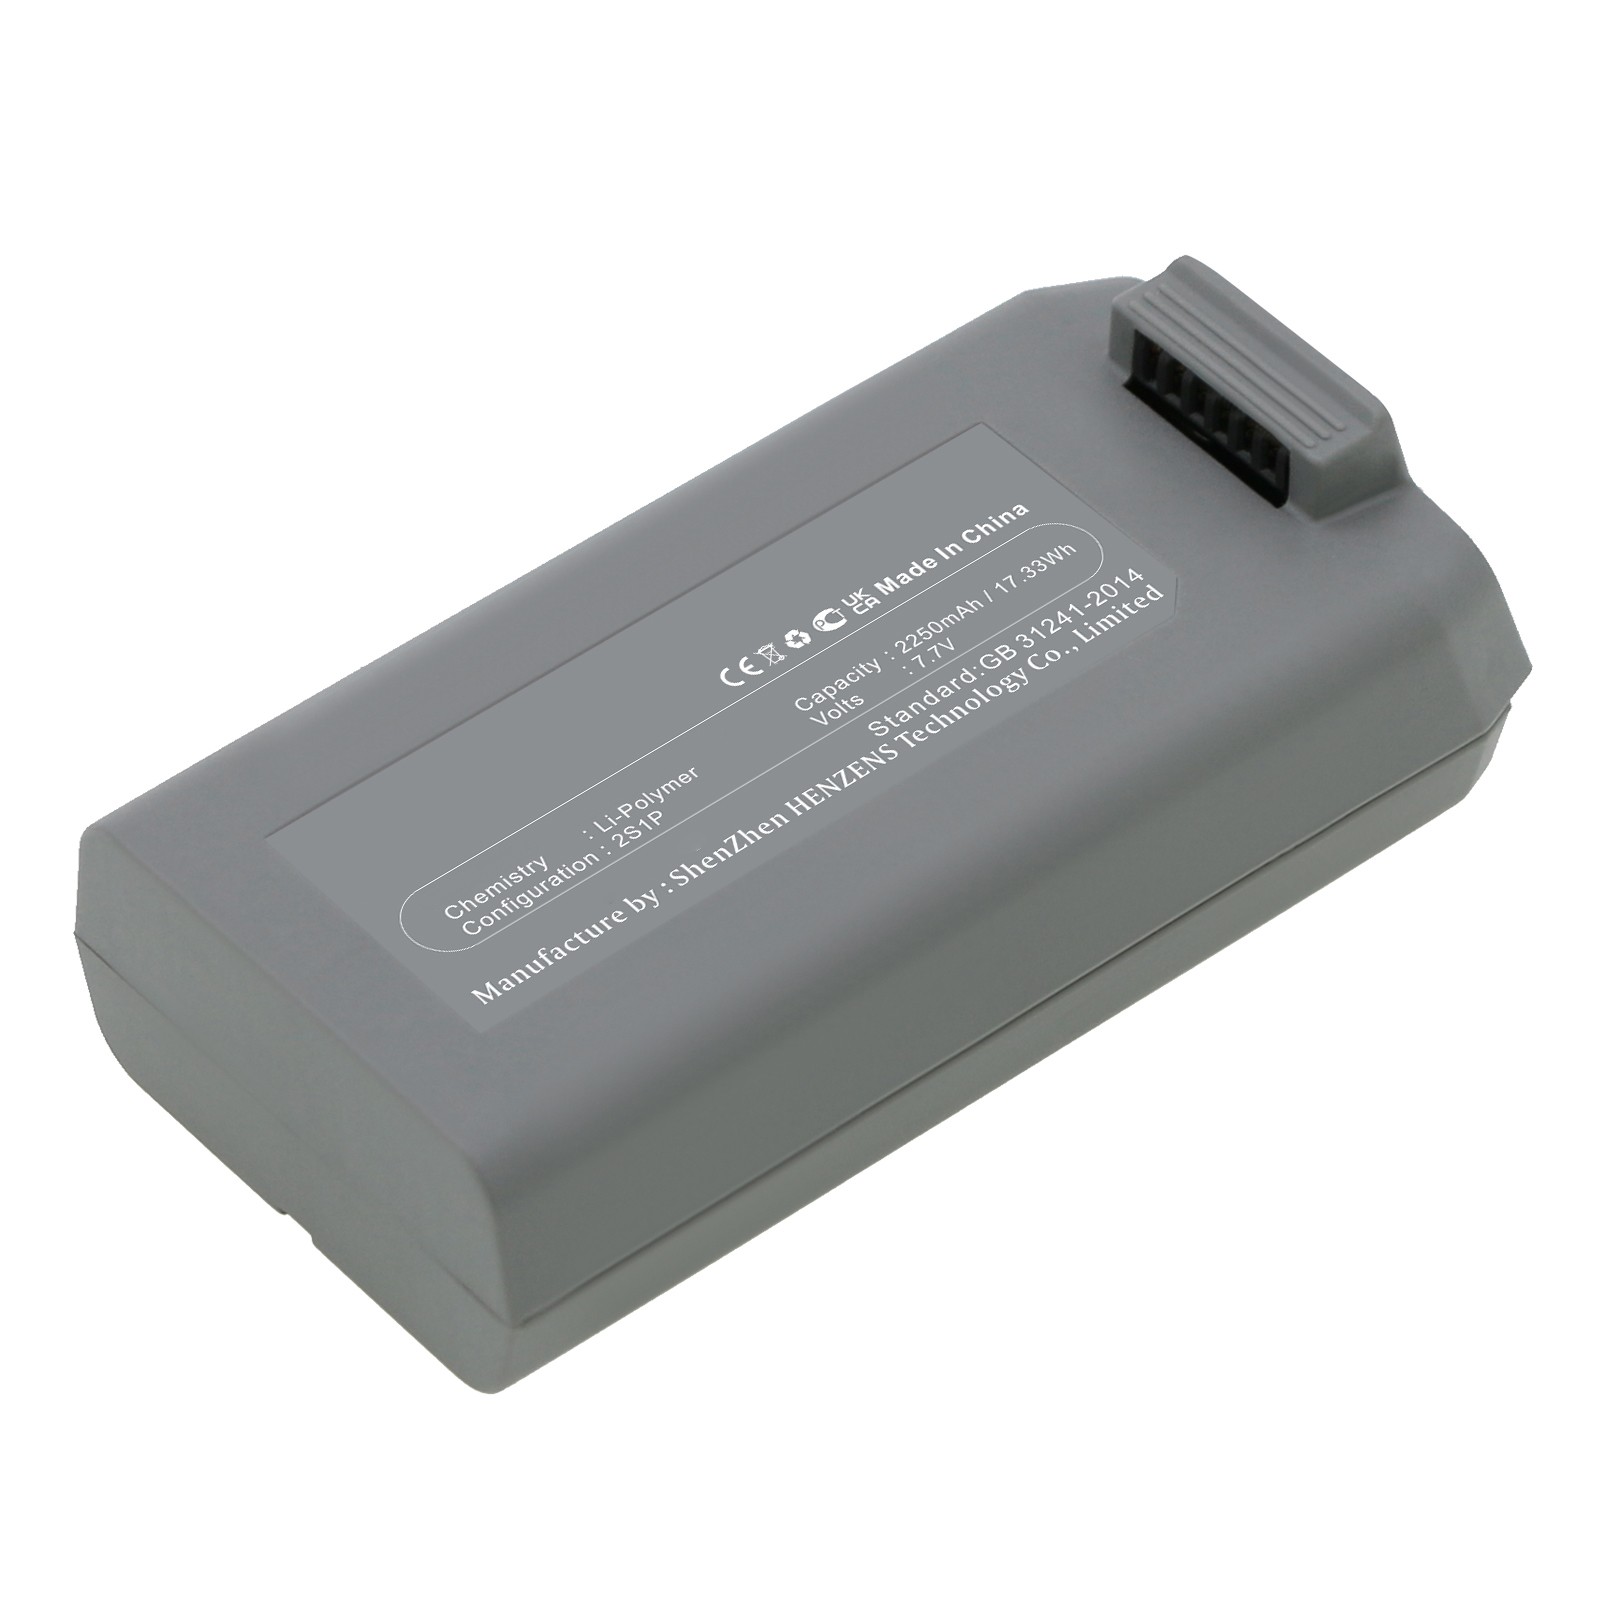 Synergy Digital Drone Battery, Compatible with DJI BWX161-2250-7.7 Drone Battery (Li-ion, 7.7V, 2250mAh)